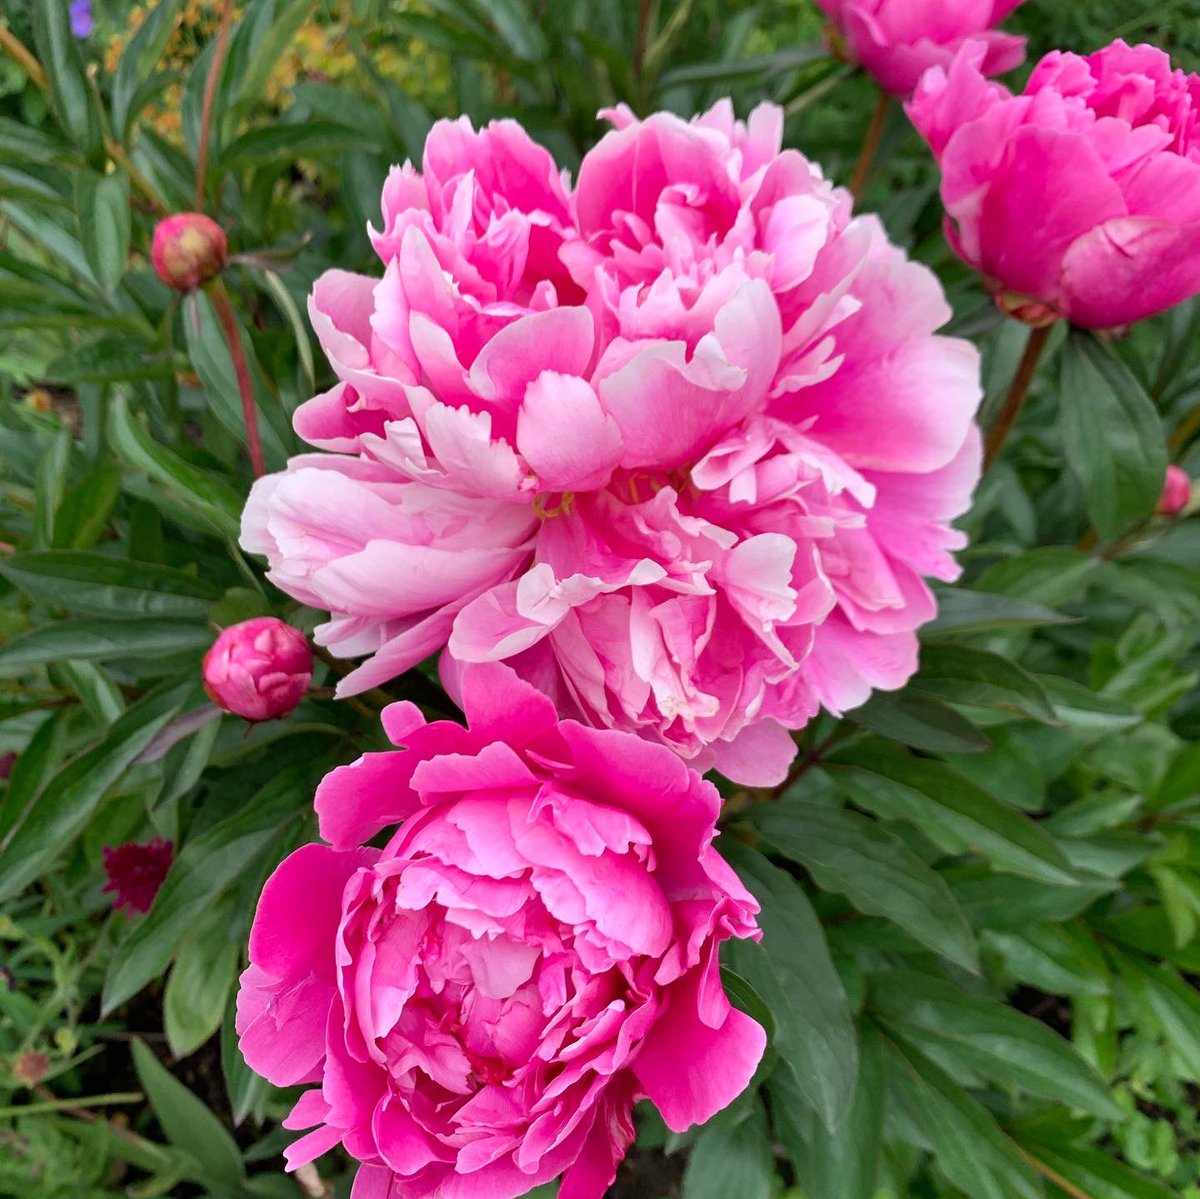 In full pomp! With their riotous large heads of flourishing petals, #peonies make an impressive impact with a real sense of occasion. #prettyinpink #petals #petalperfection #flowerpower #beautiful #blooms #floralperfection #homegrownflowers #mygarden #countrygarden